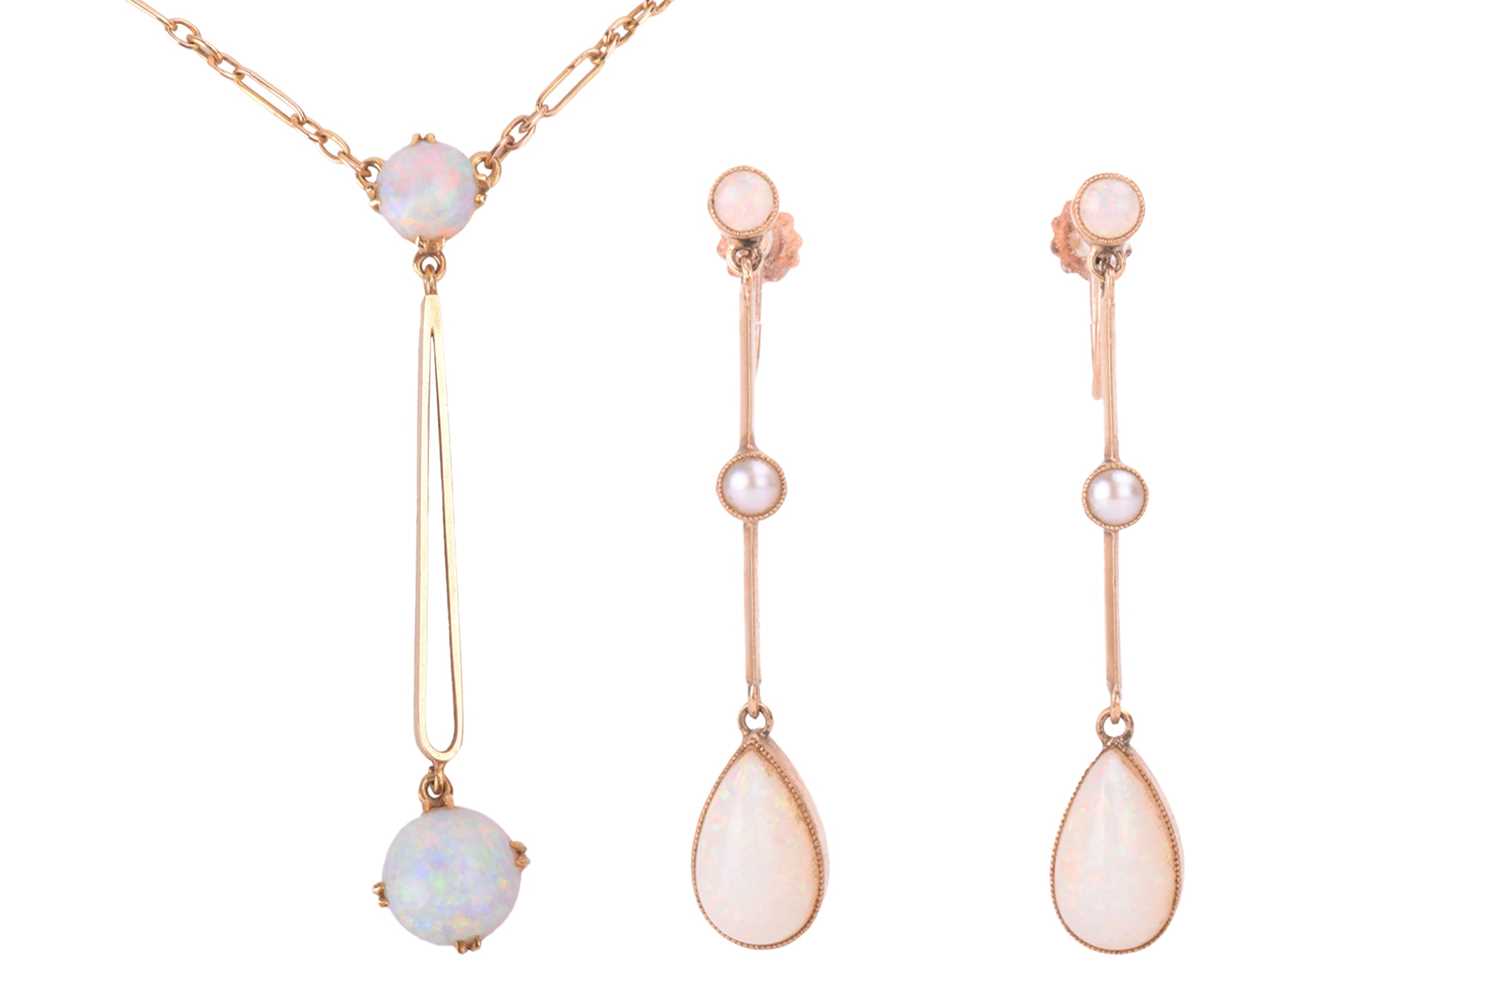 An Edwardian opal lavaliere necklace and opal and seed pearl earrings, the pendant featuring a